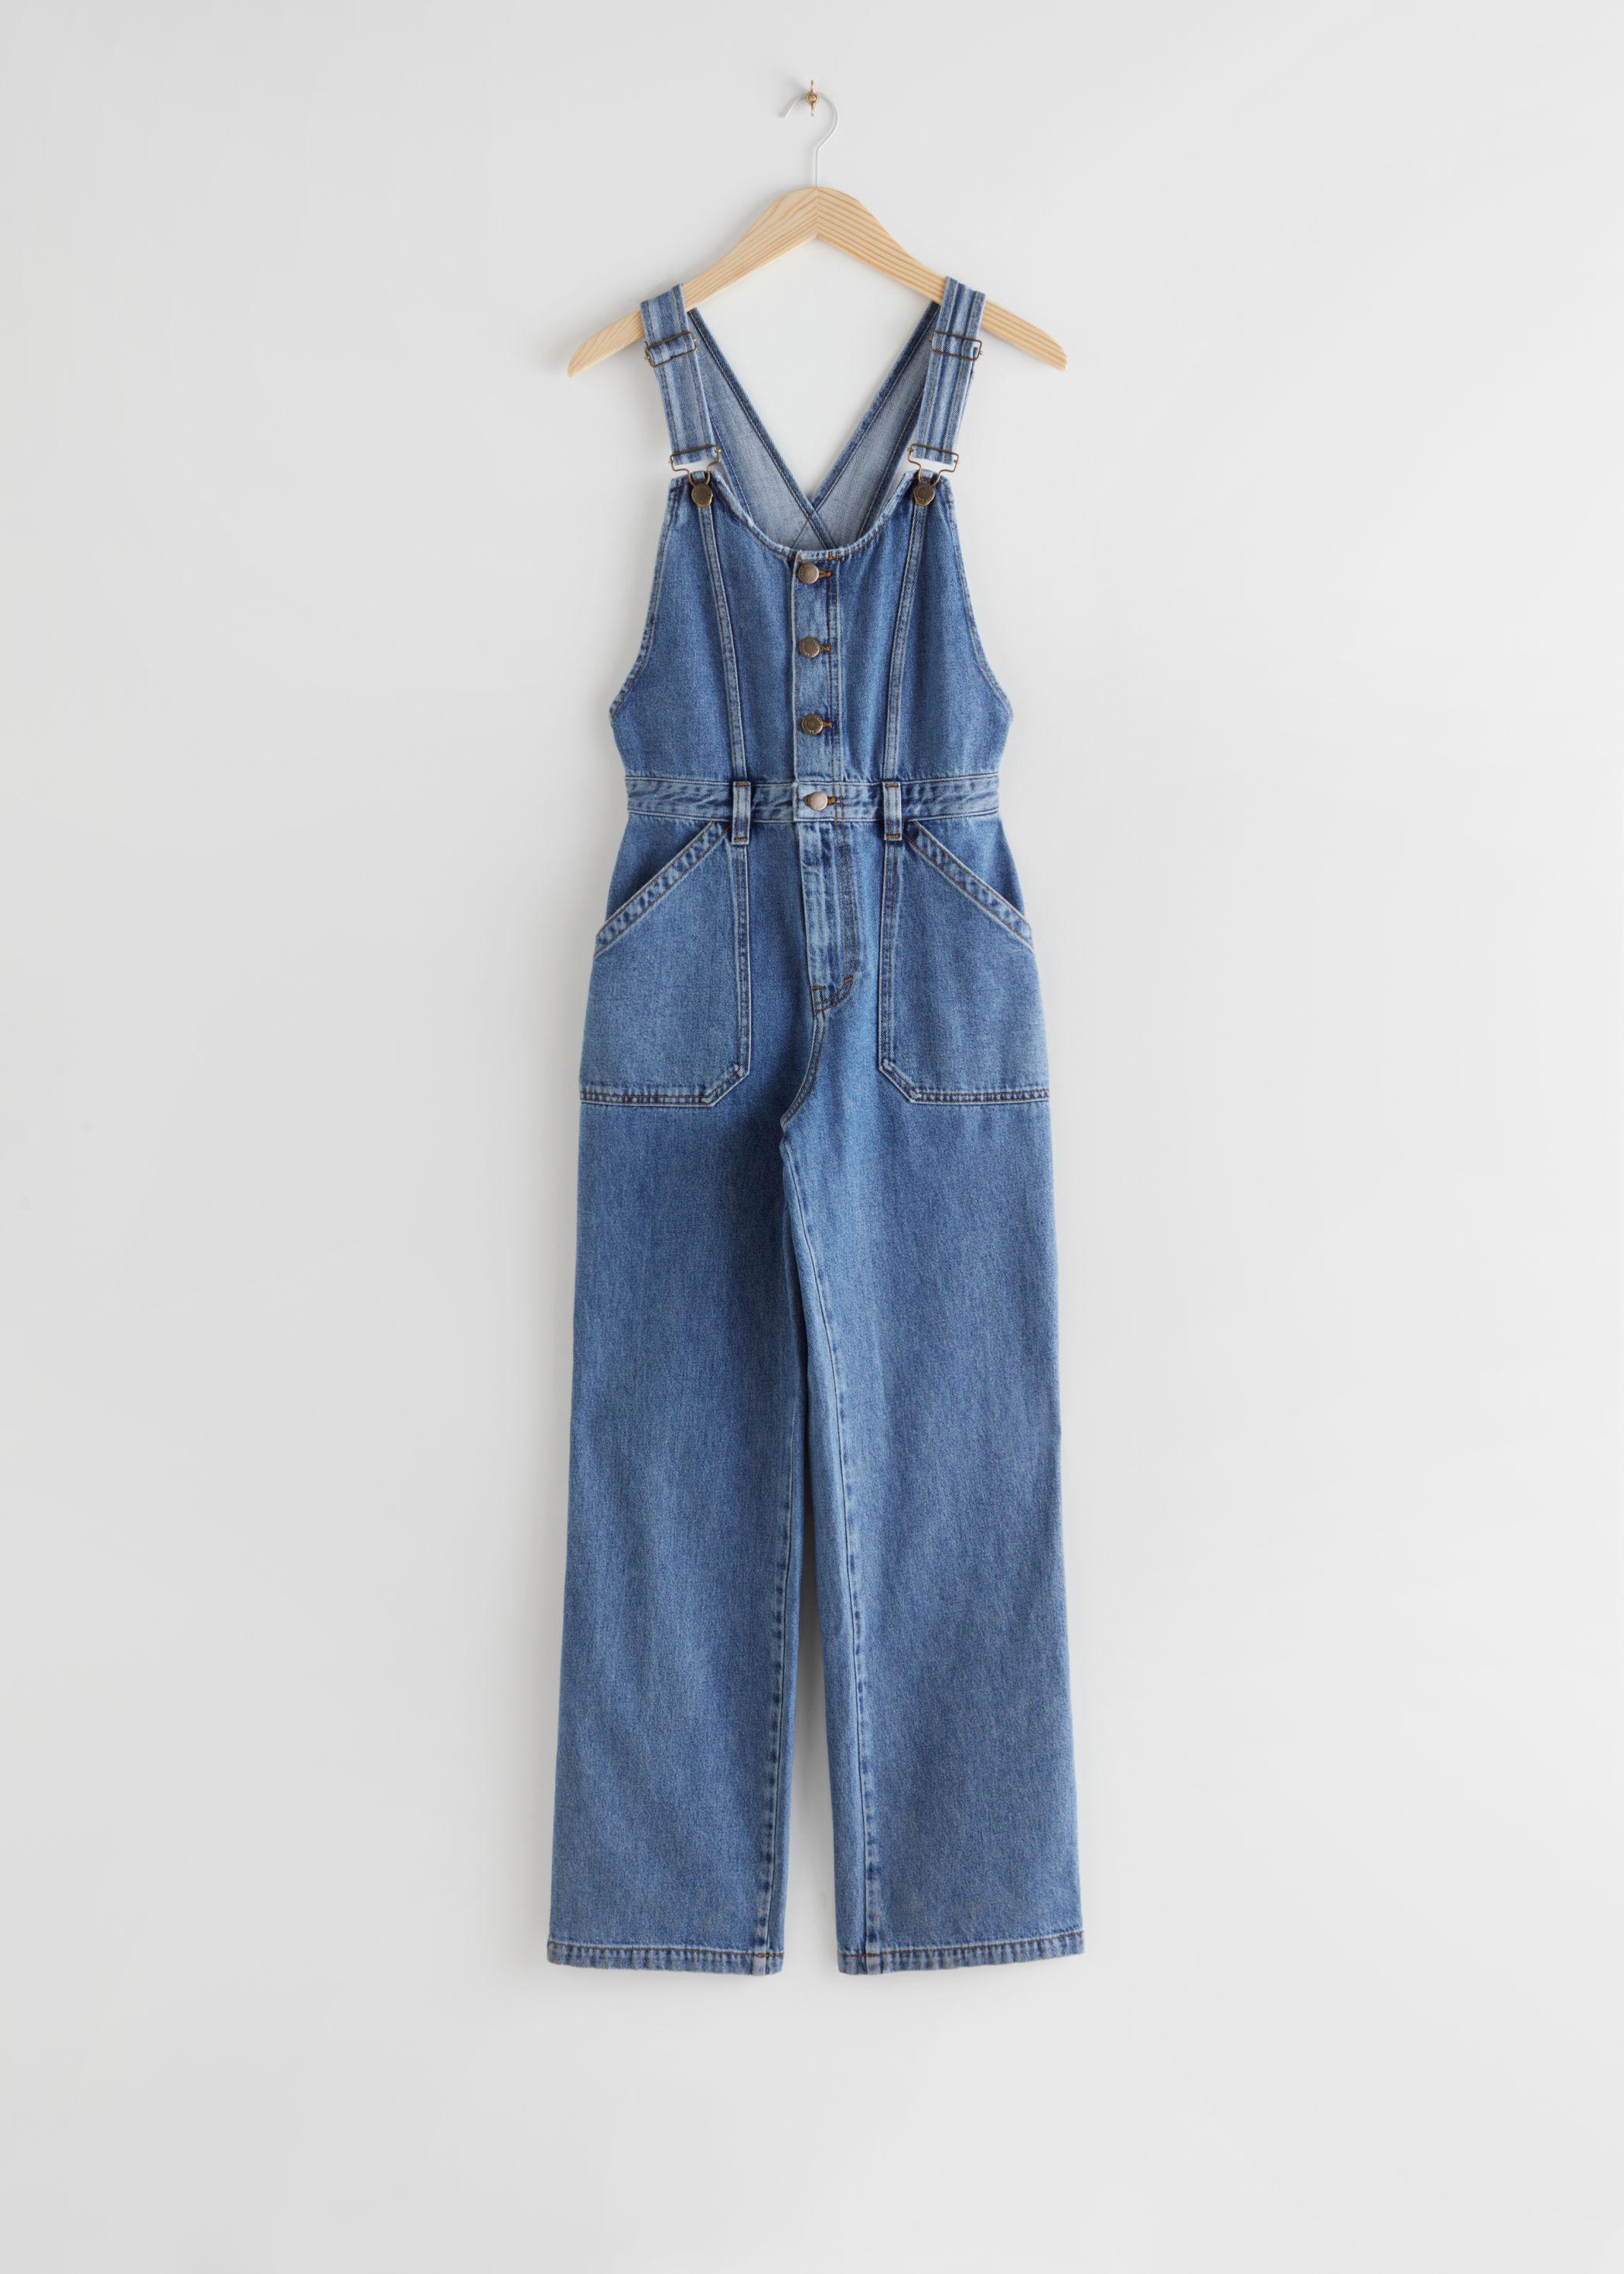 & Other Stories Straight Leg Denim Dungarees in Blue | Lyst